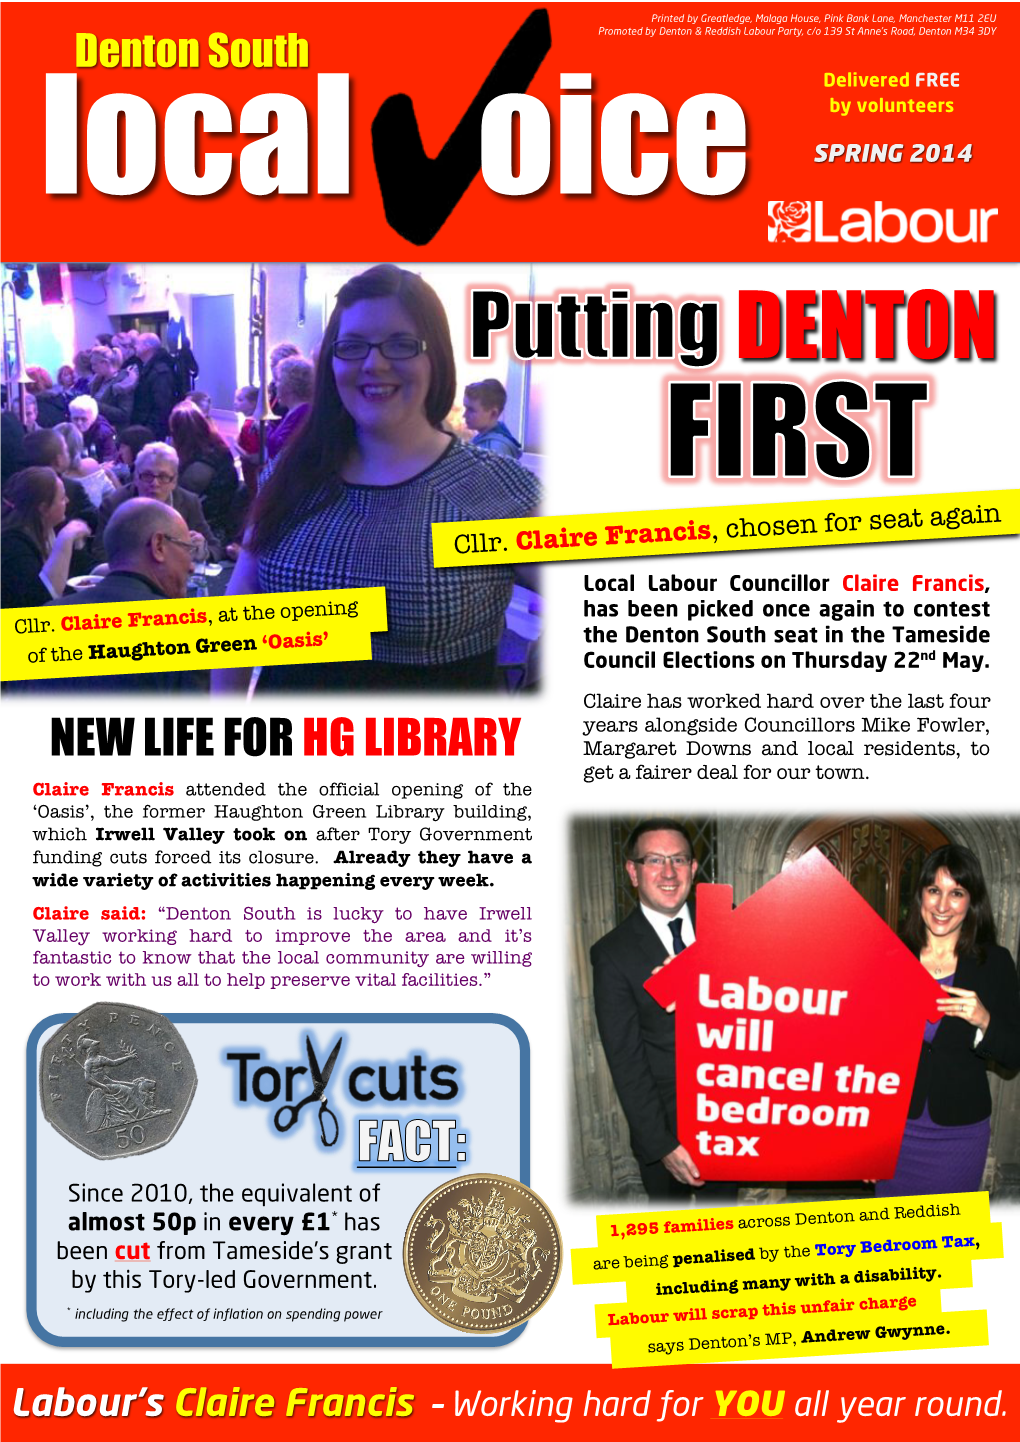 Denton & Reddish Labour Party, C/O 139 St Anne’S Road, Denton M34 3DY Denton South Delivered FREE by Volunteers √" " Local Oice SPRING 2014 DENTON